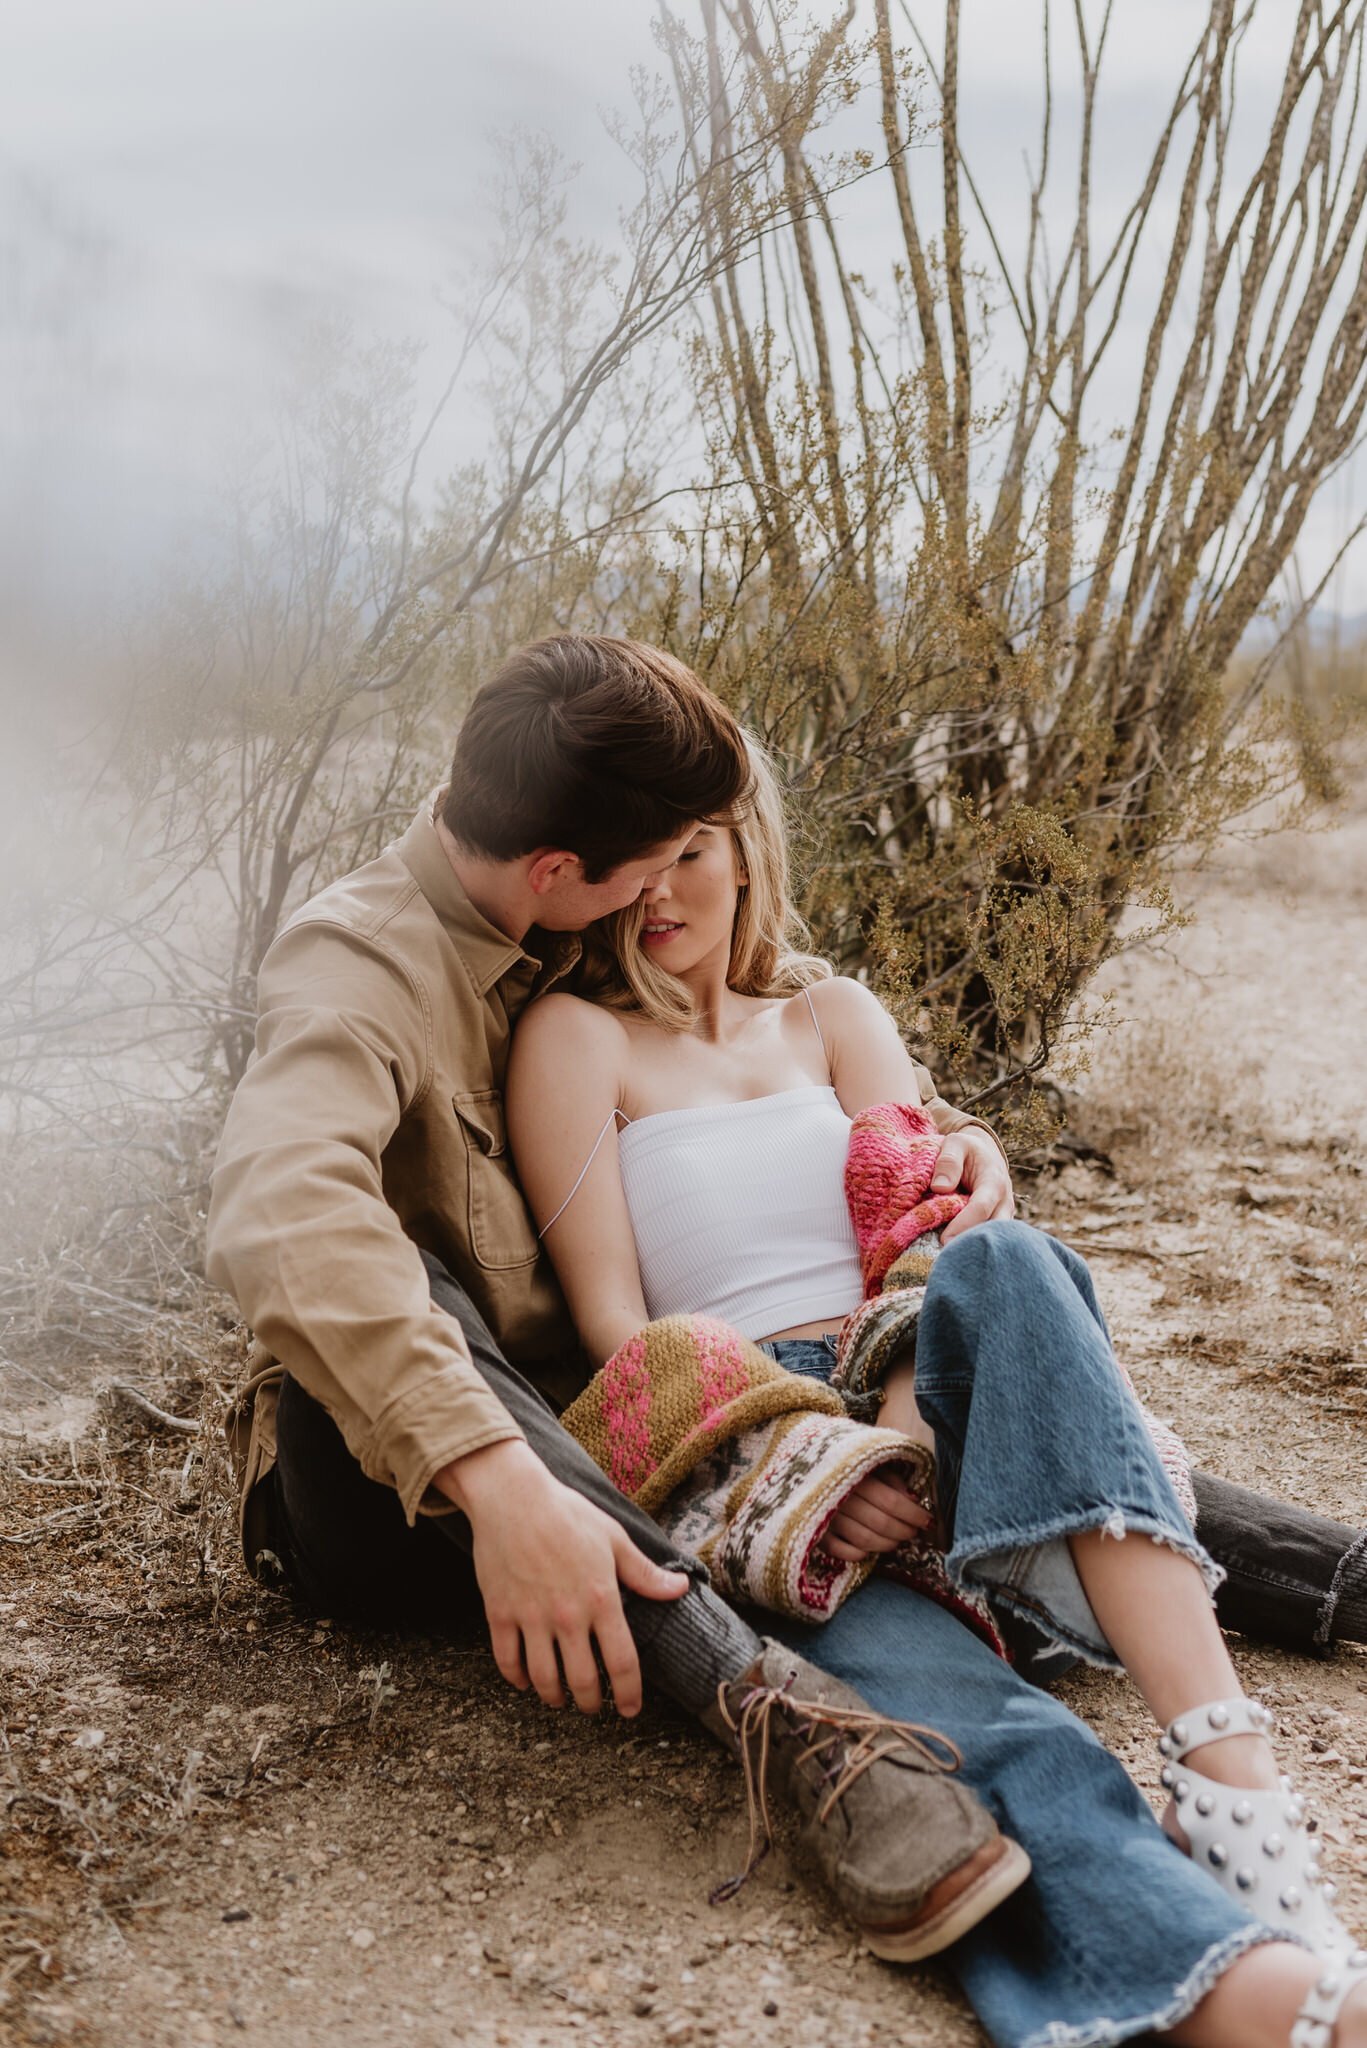 Kaylie-Sirek-Photography-Big-Bend-National-Park-Texas-Engagement-Session-Styled-You-014.jpg